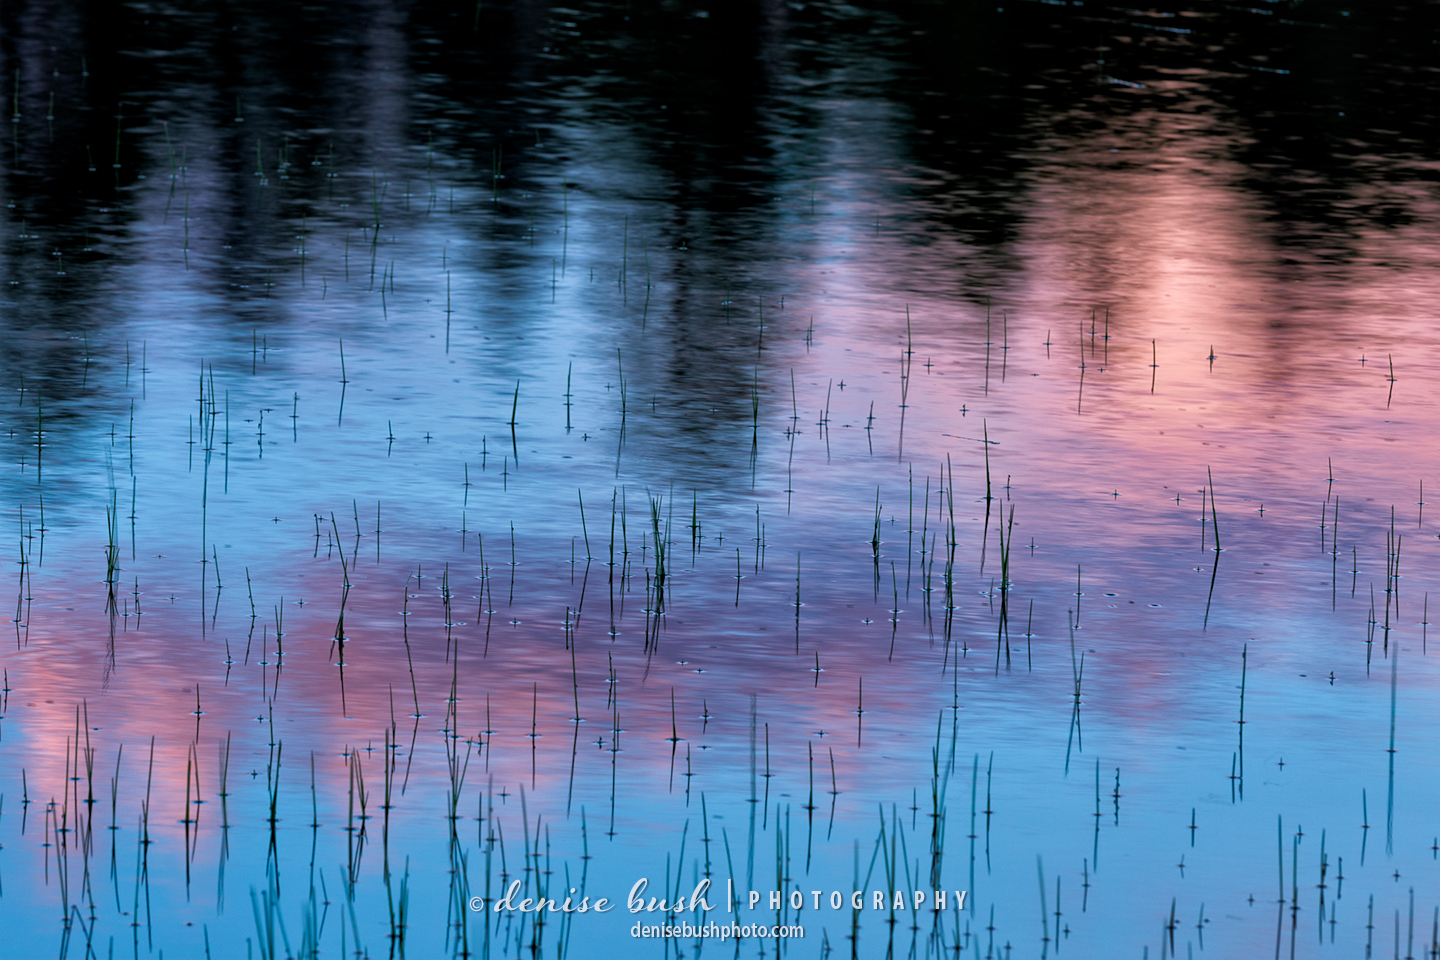 A sunset reflection creates a pleasing nature abstract.